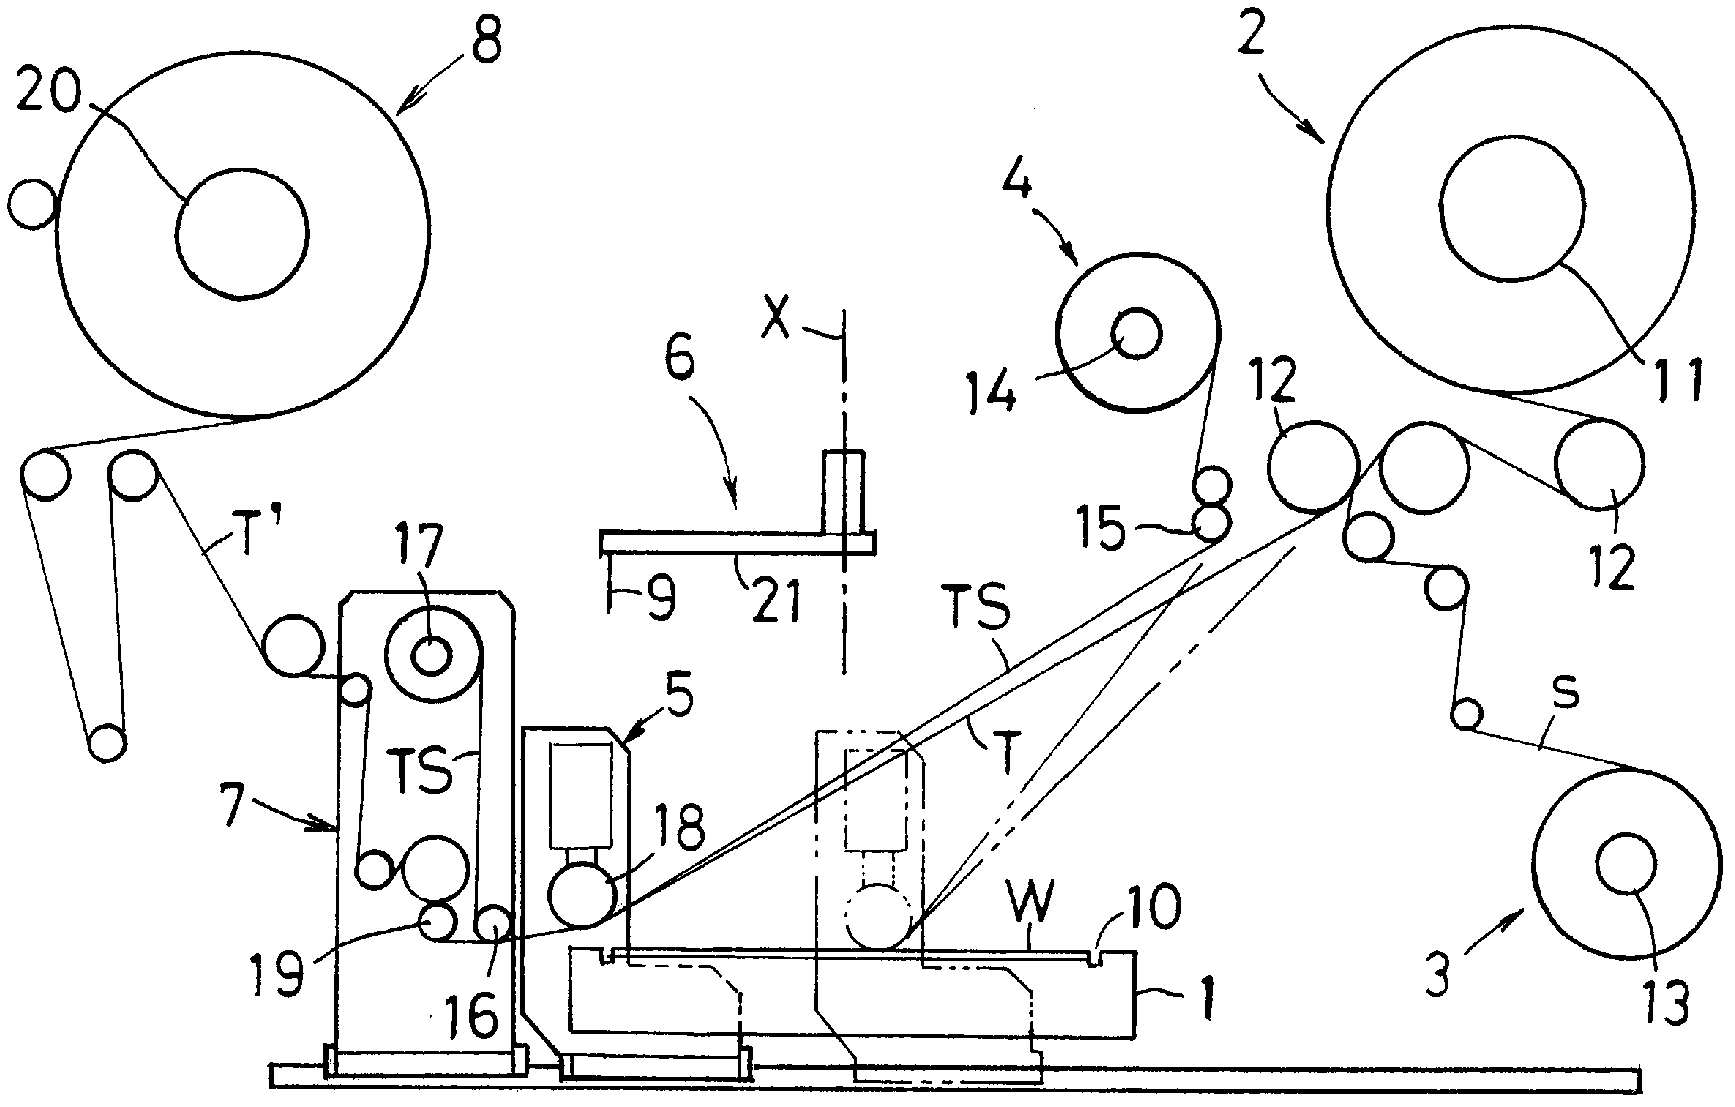 Method for adhering protection tape